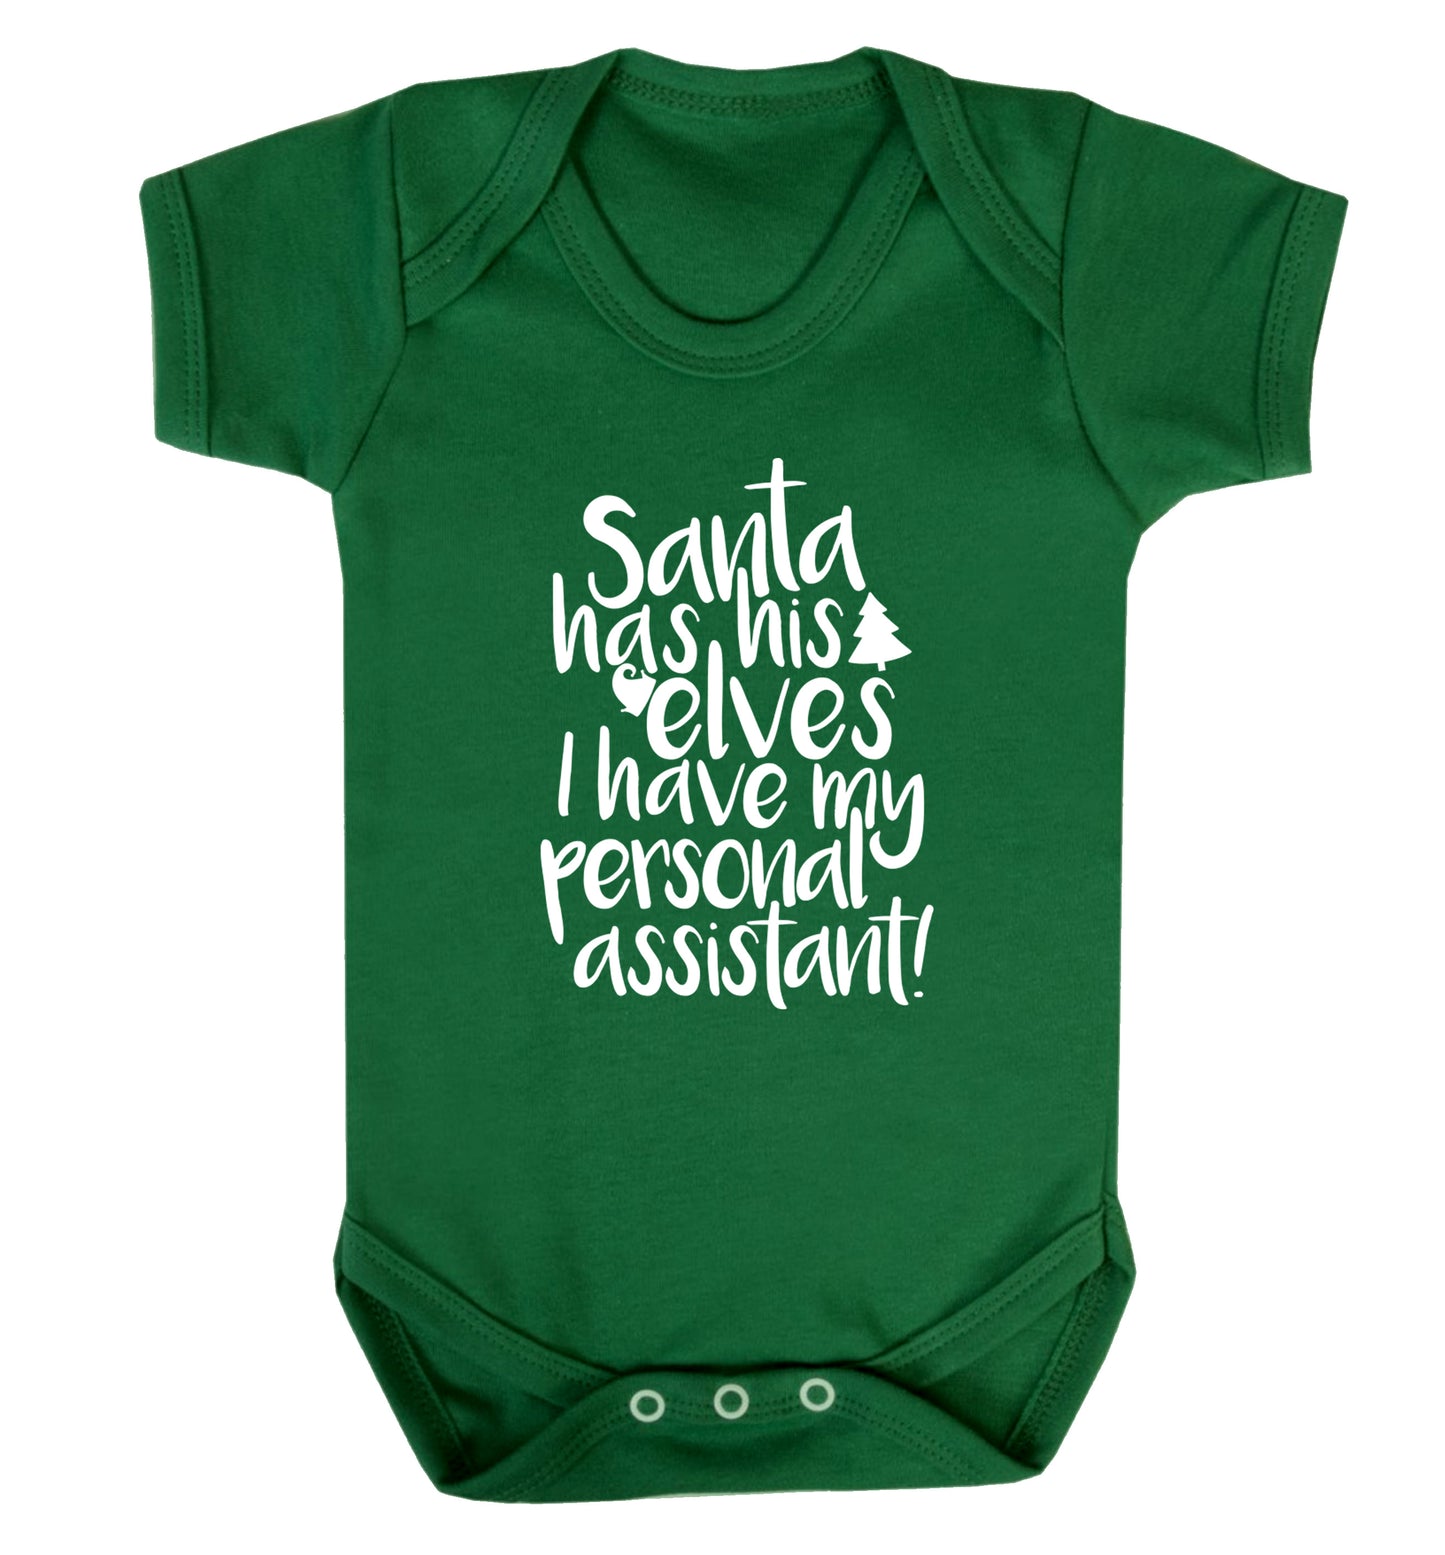 Santa has his elves I have my personal assistant Baby Vest green 18-24 months